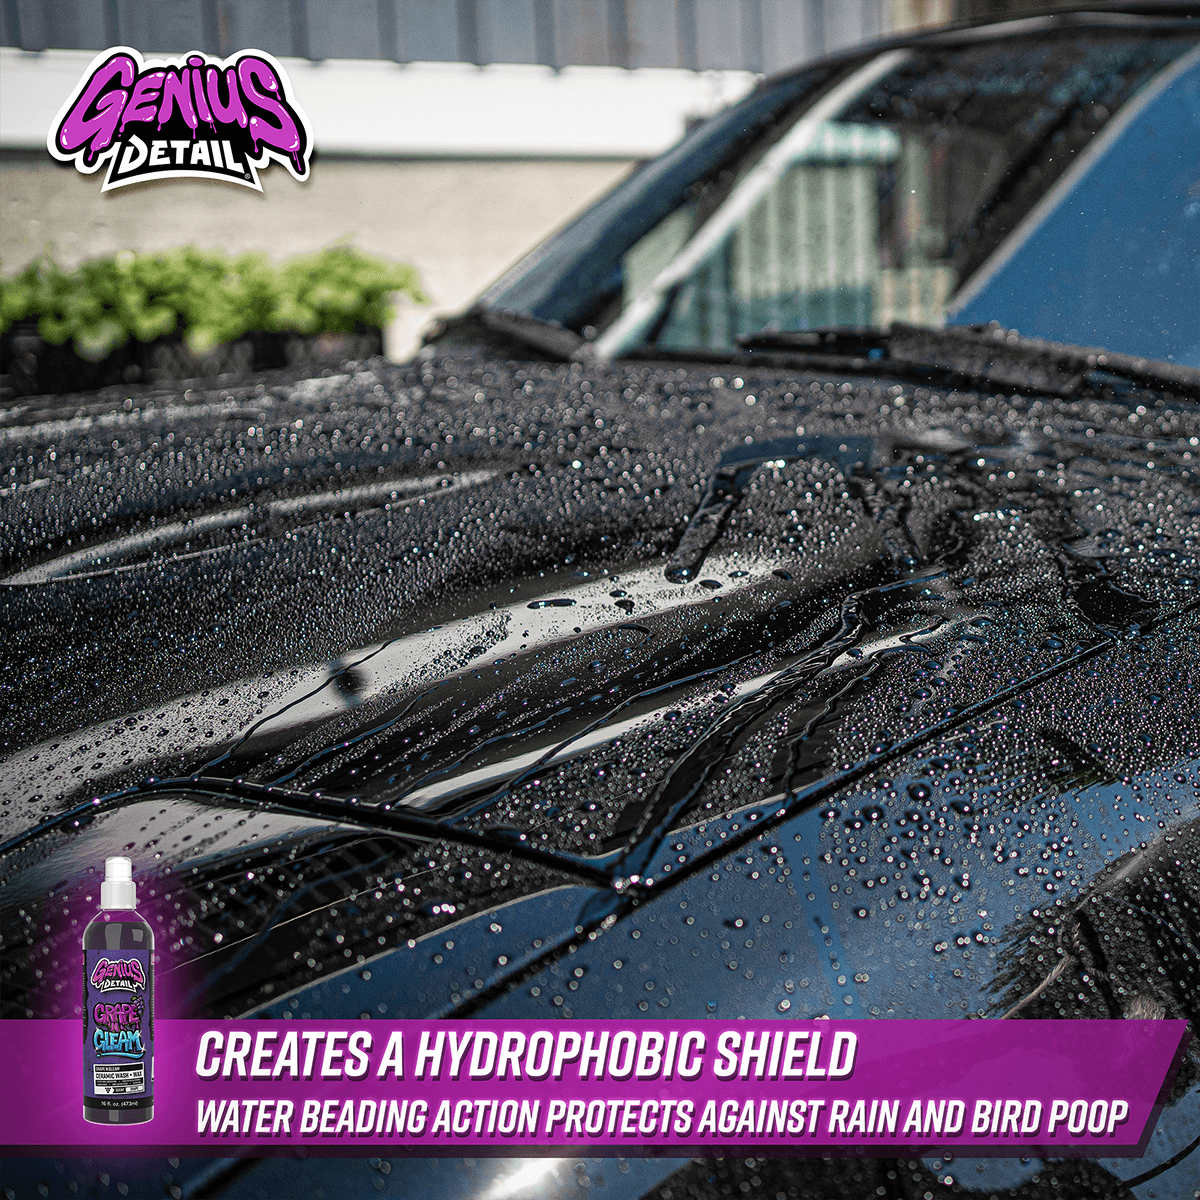 Creates a hydrophobic shield for your car - Water beading action protects against rain and bird poop